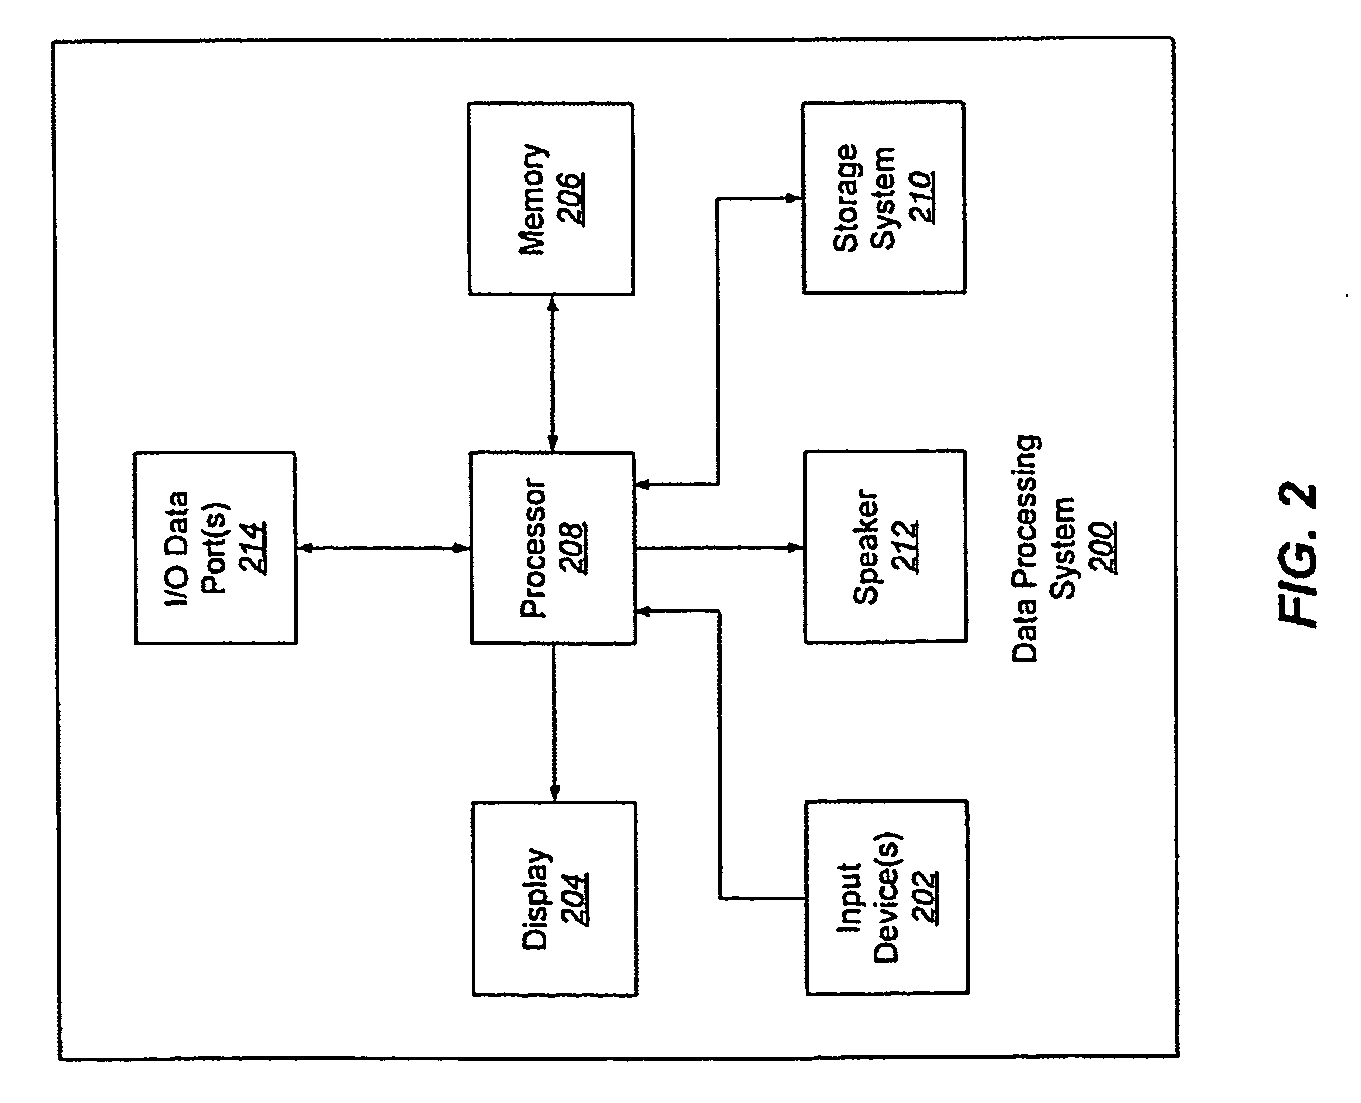 Methods, systems, and computer program products for dynamic management of security parameters during a communications session